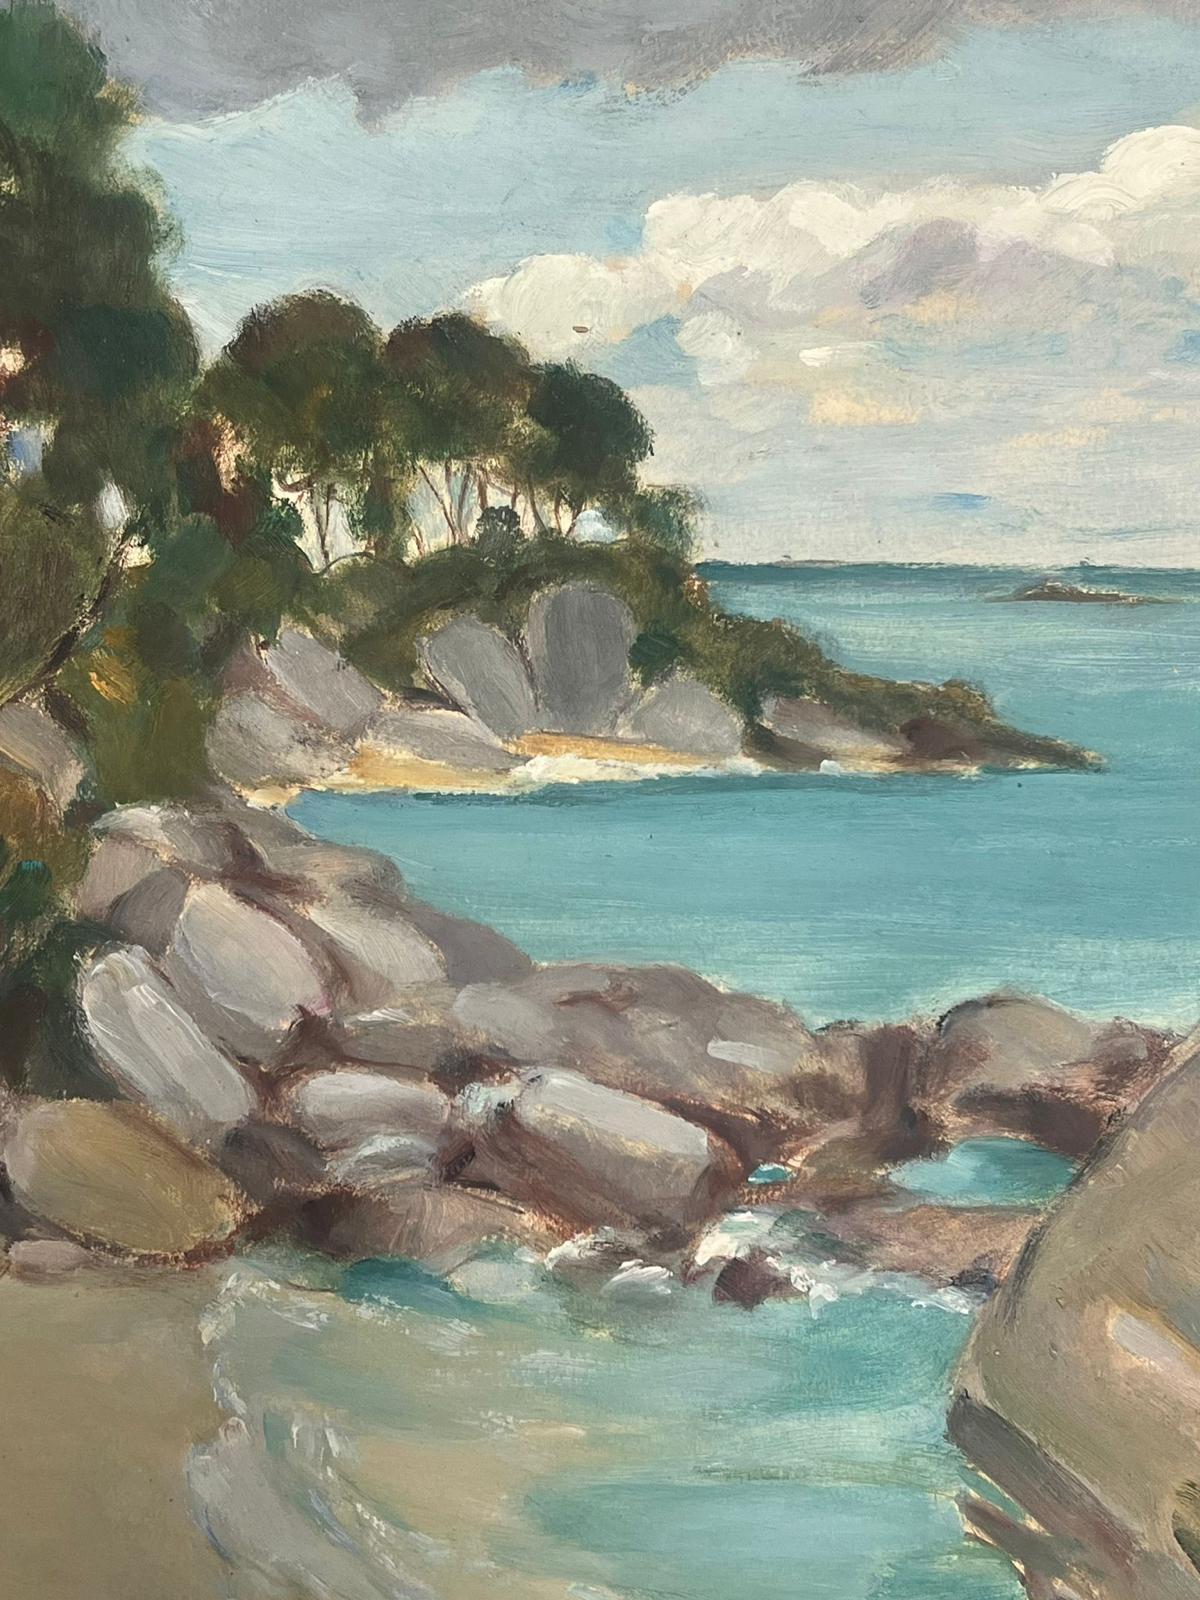 French Landscape
signed initials by Louise Alix (French, 1888-1980) *see notes below
oil painting on artist paper, unframed
measures: 16.5 inches high by 13 inches wide
condition: overall very good and sound, with the edges retaining an unfinished